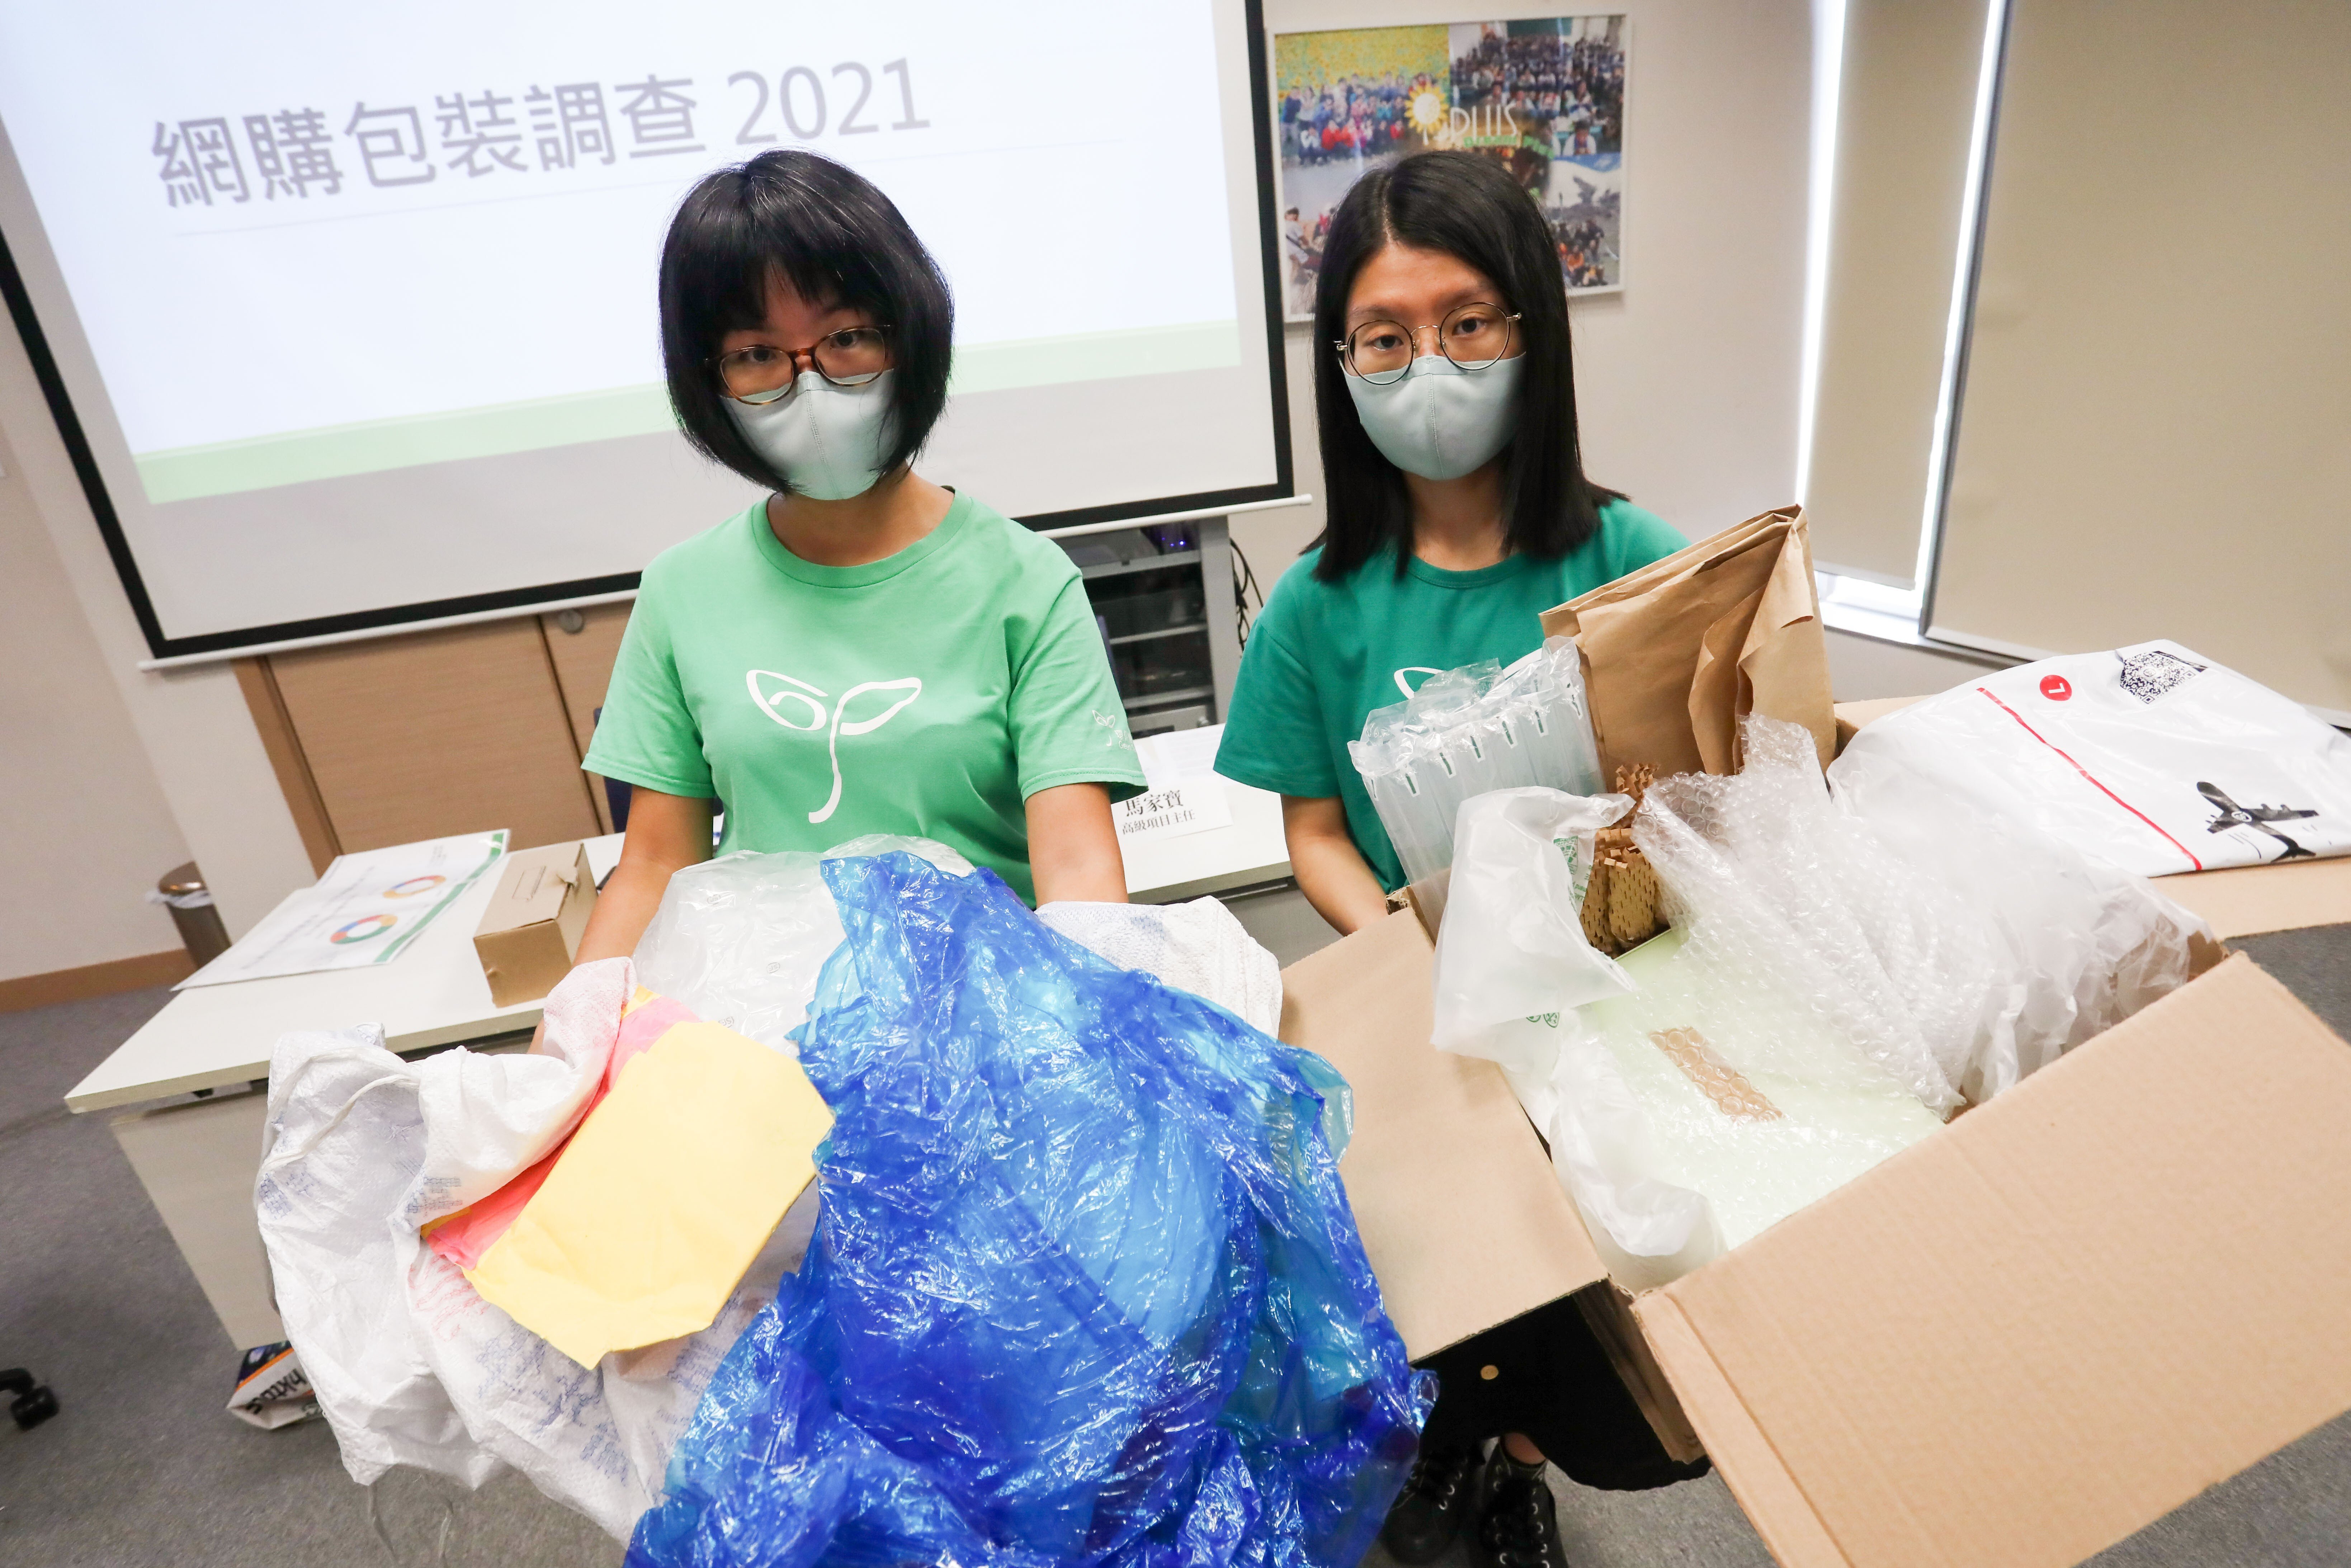 How Illegal Cardboard Recycling Is Booming During the Pandemic